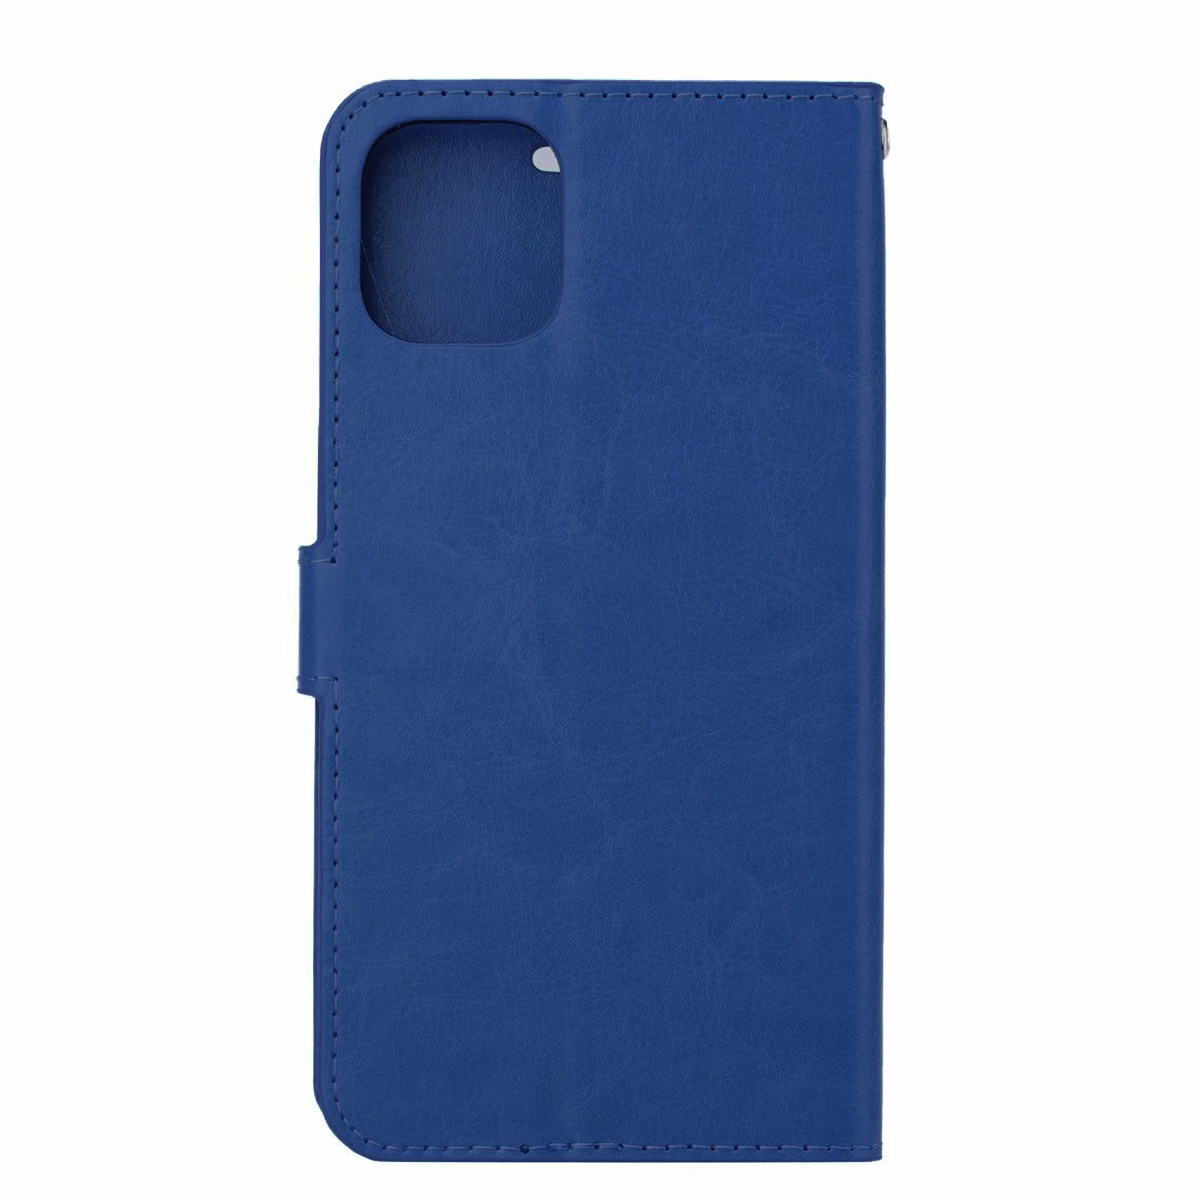 Nomfy Hoes voor iPhone 11 Pro Max Hoes Bookcase Flipcase Book Cover - Hoes voor iPhone 11 Pro Max Hoesje Book Case - Donker Blauw